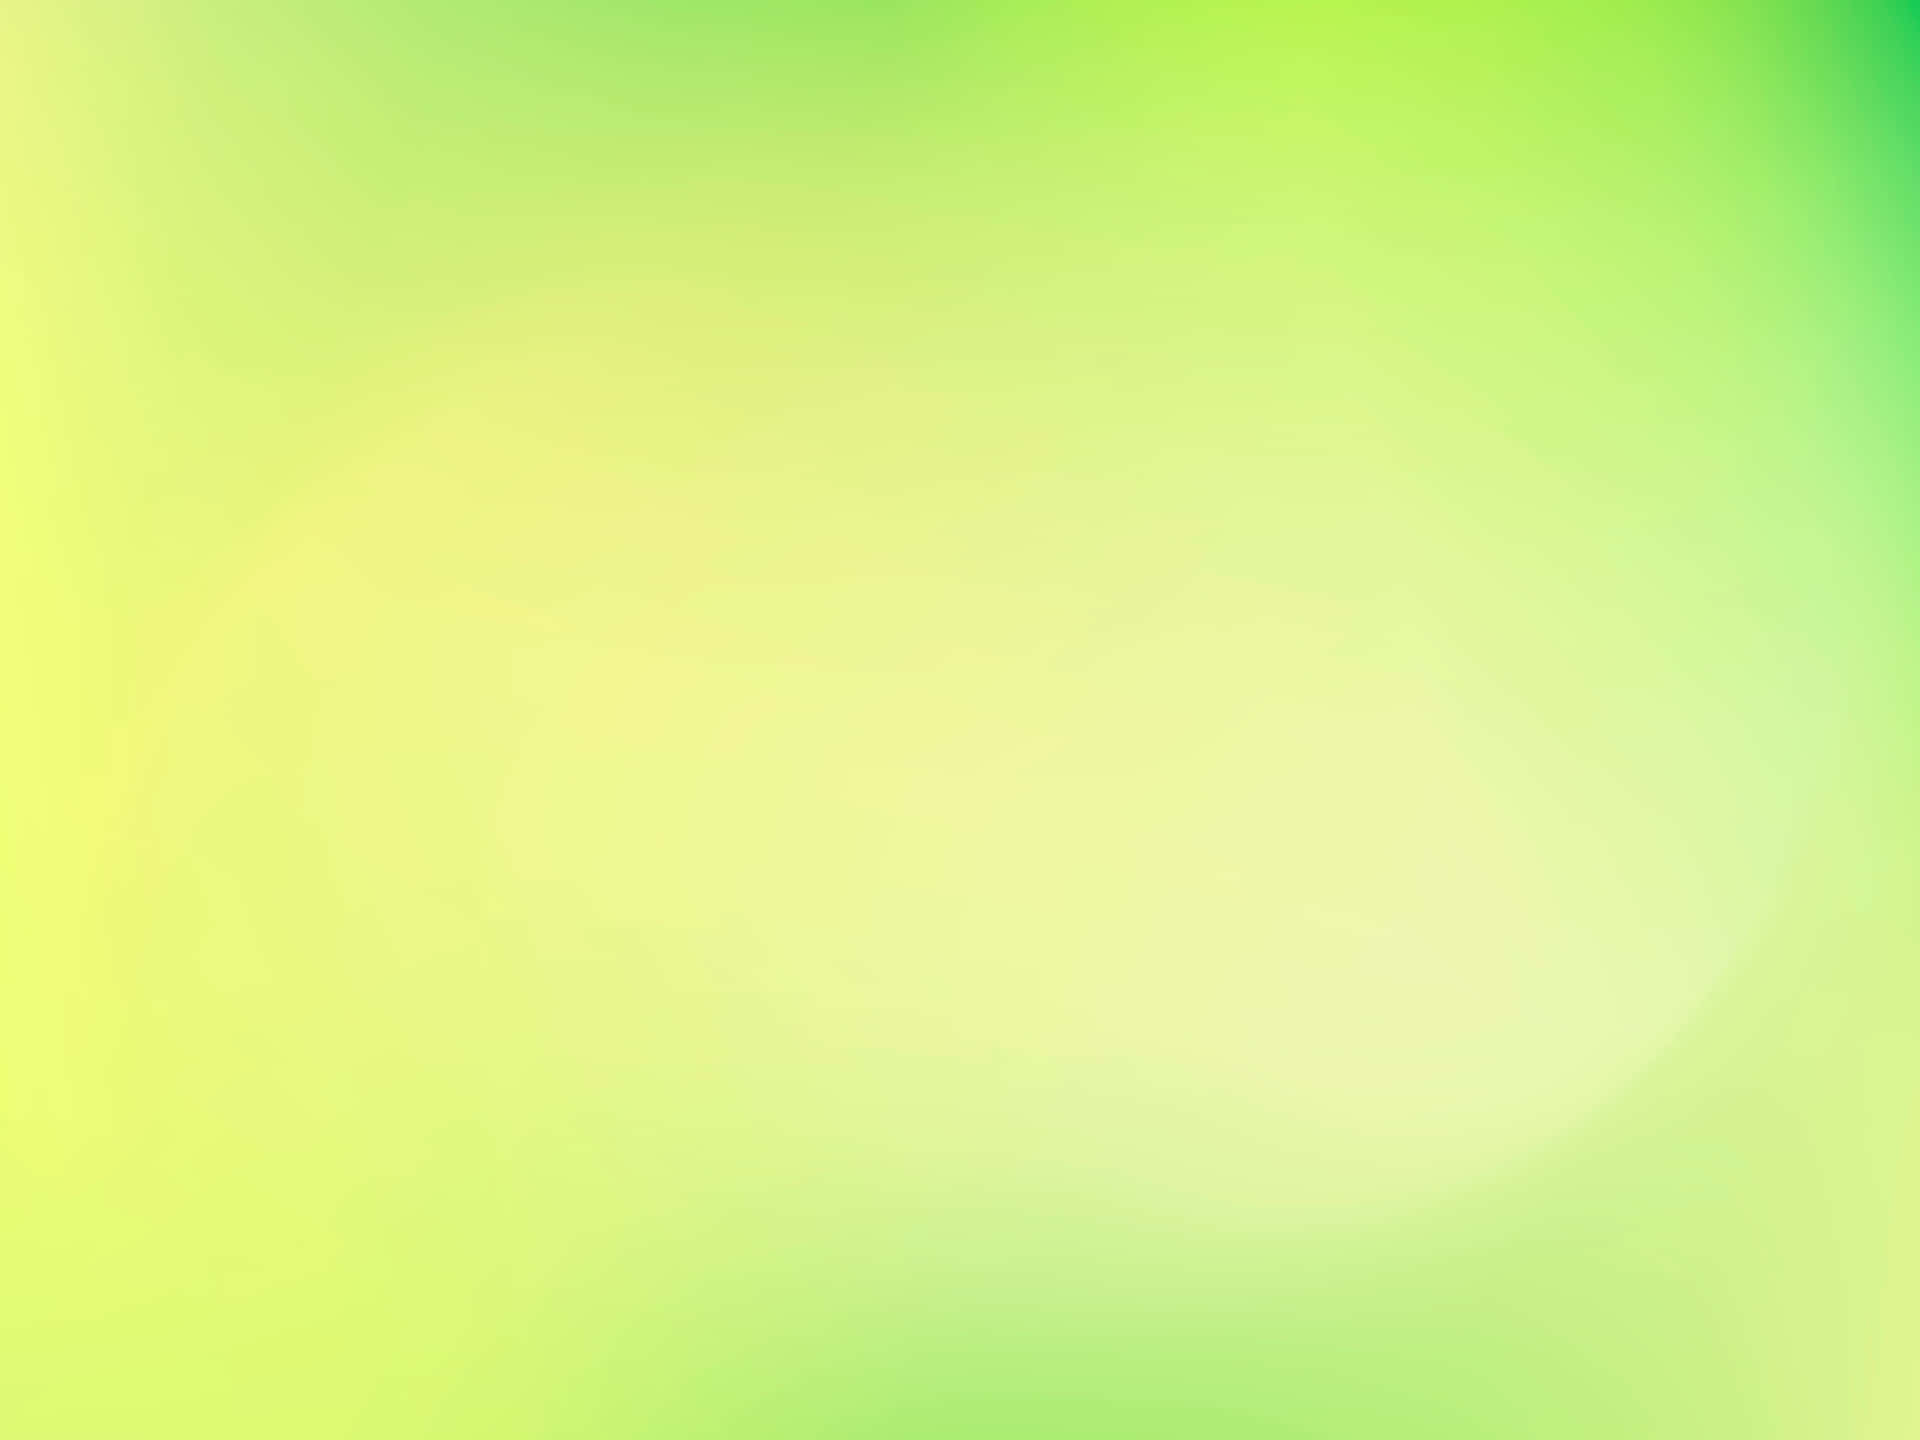 A Bright Yellow Gradient Background